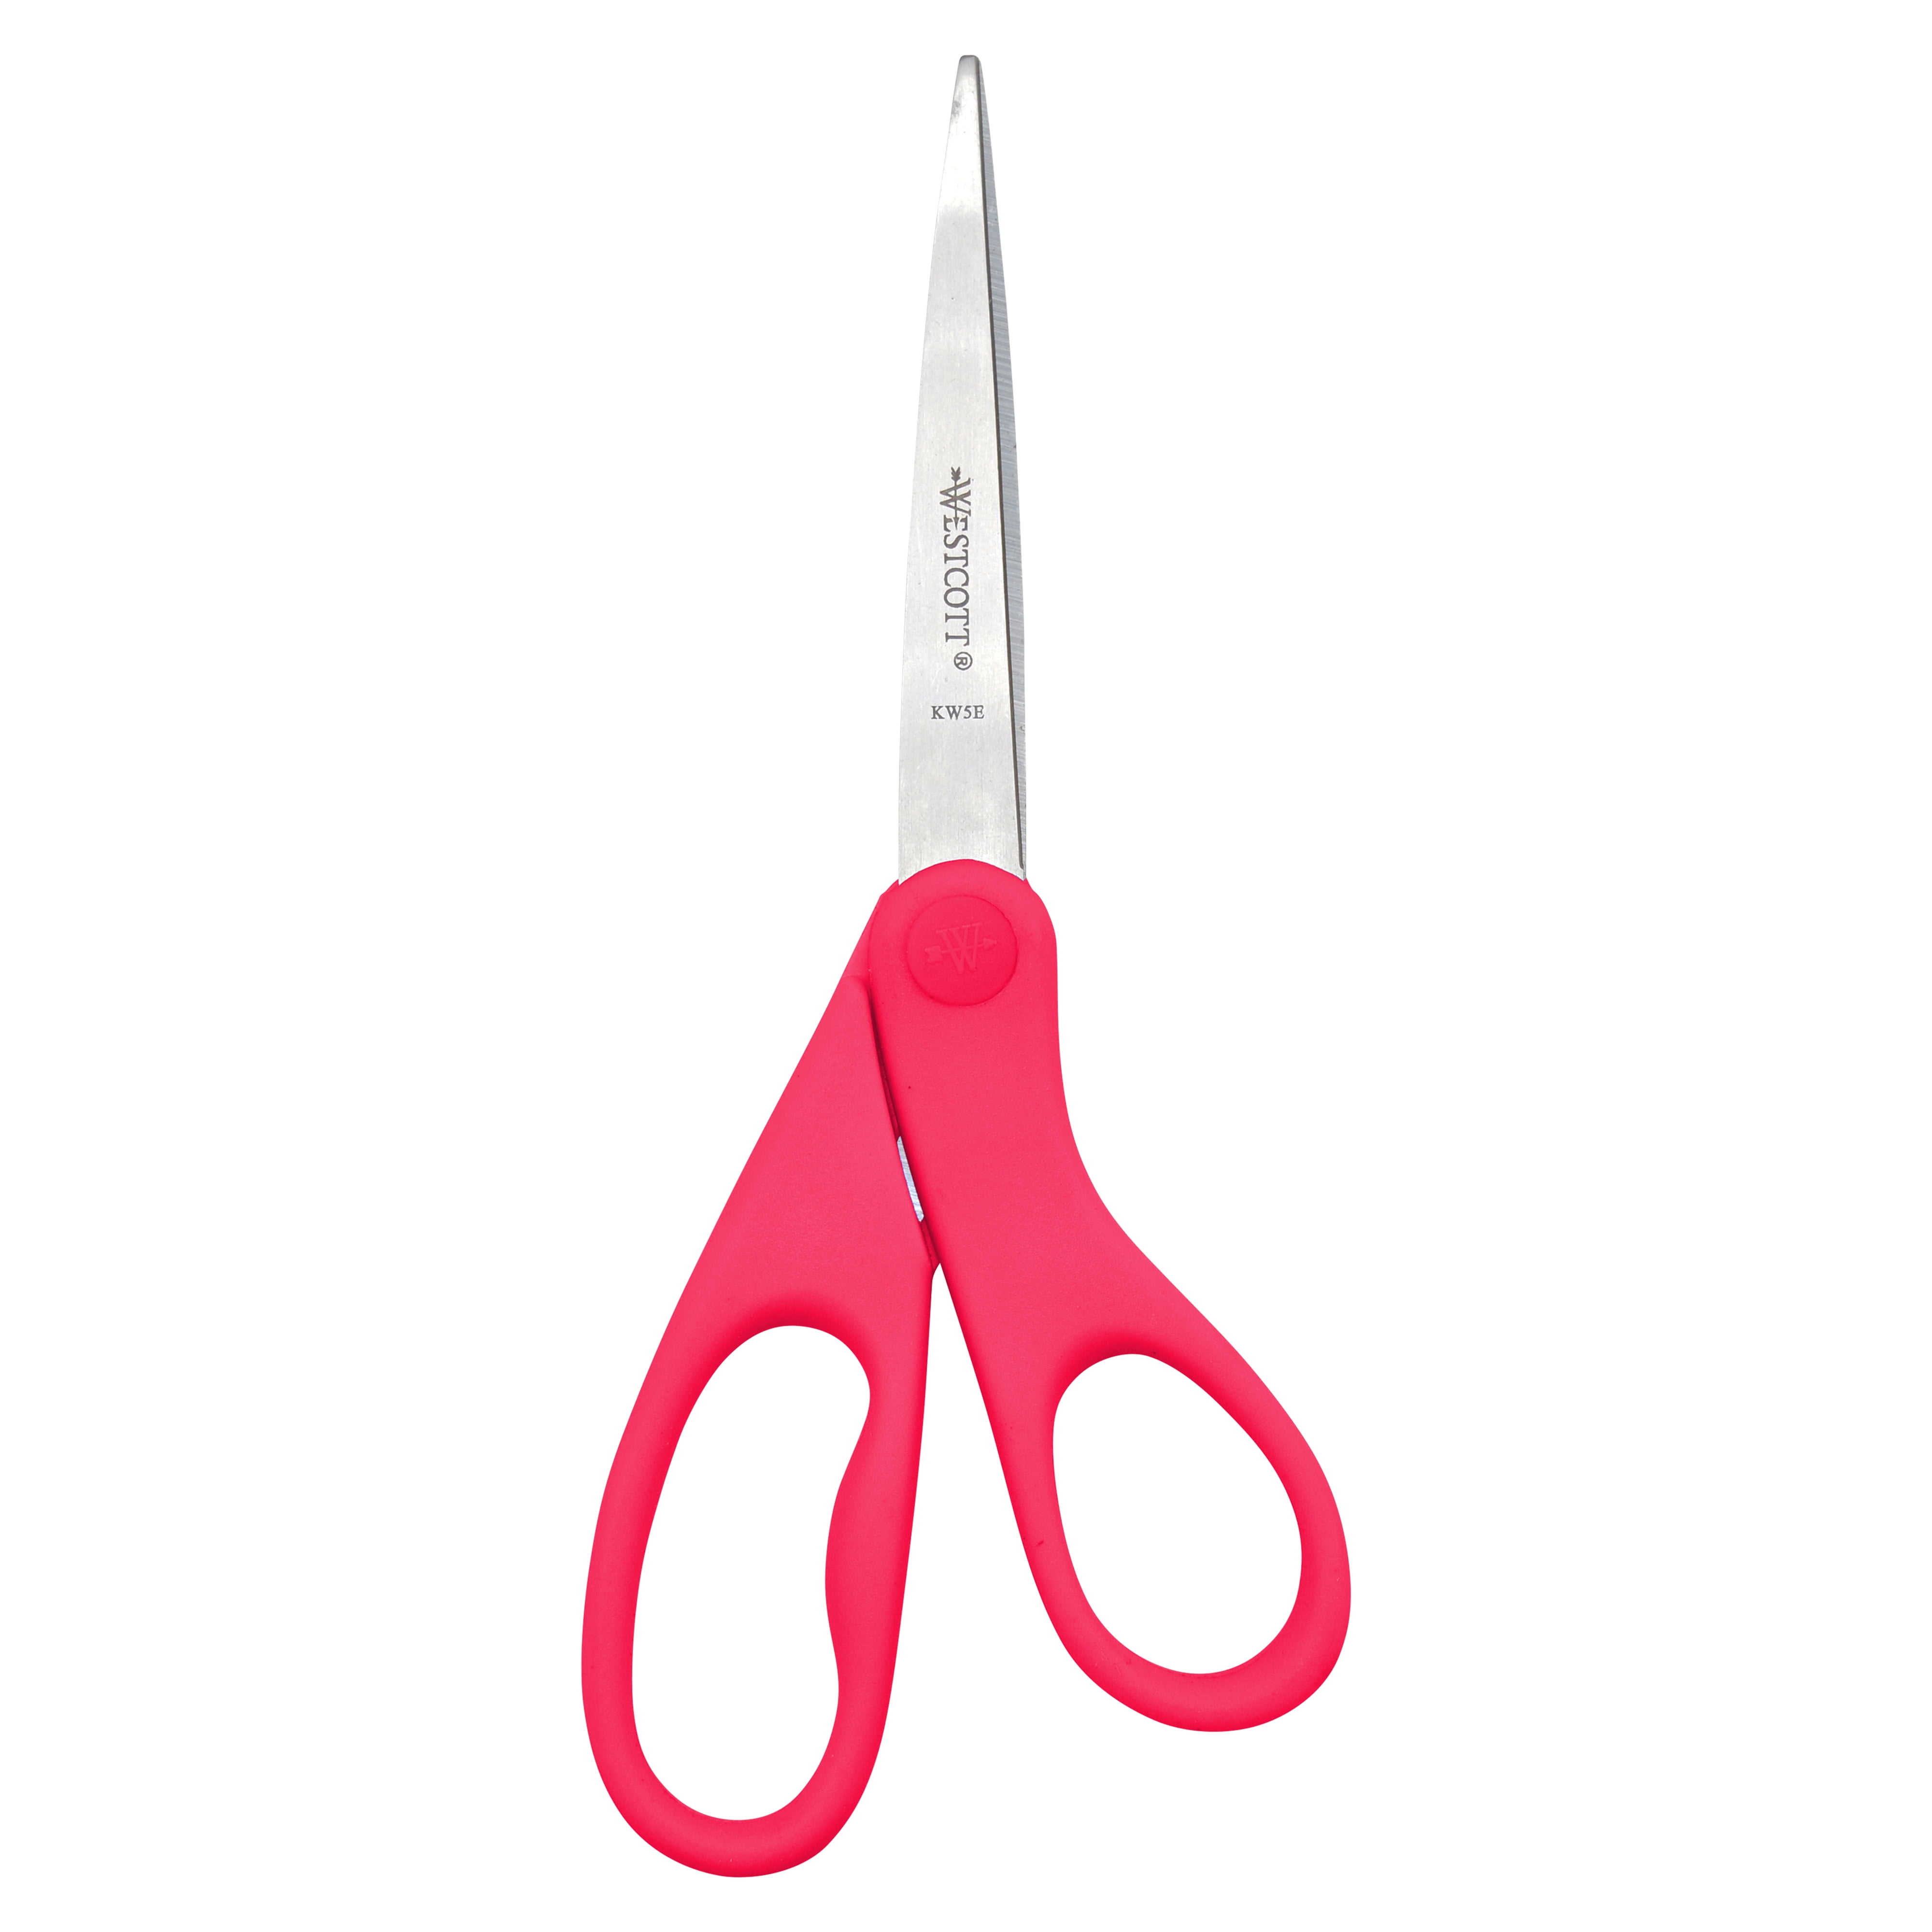  Westcott 55846 7-Inch School Scissors, All-Purpose Heavy-Duty  Scissors for Crafting, School and Work, Red/Gray, 2 Pack : Arts, Crafts &  Sewing